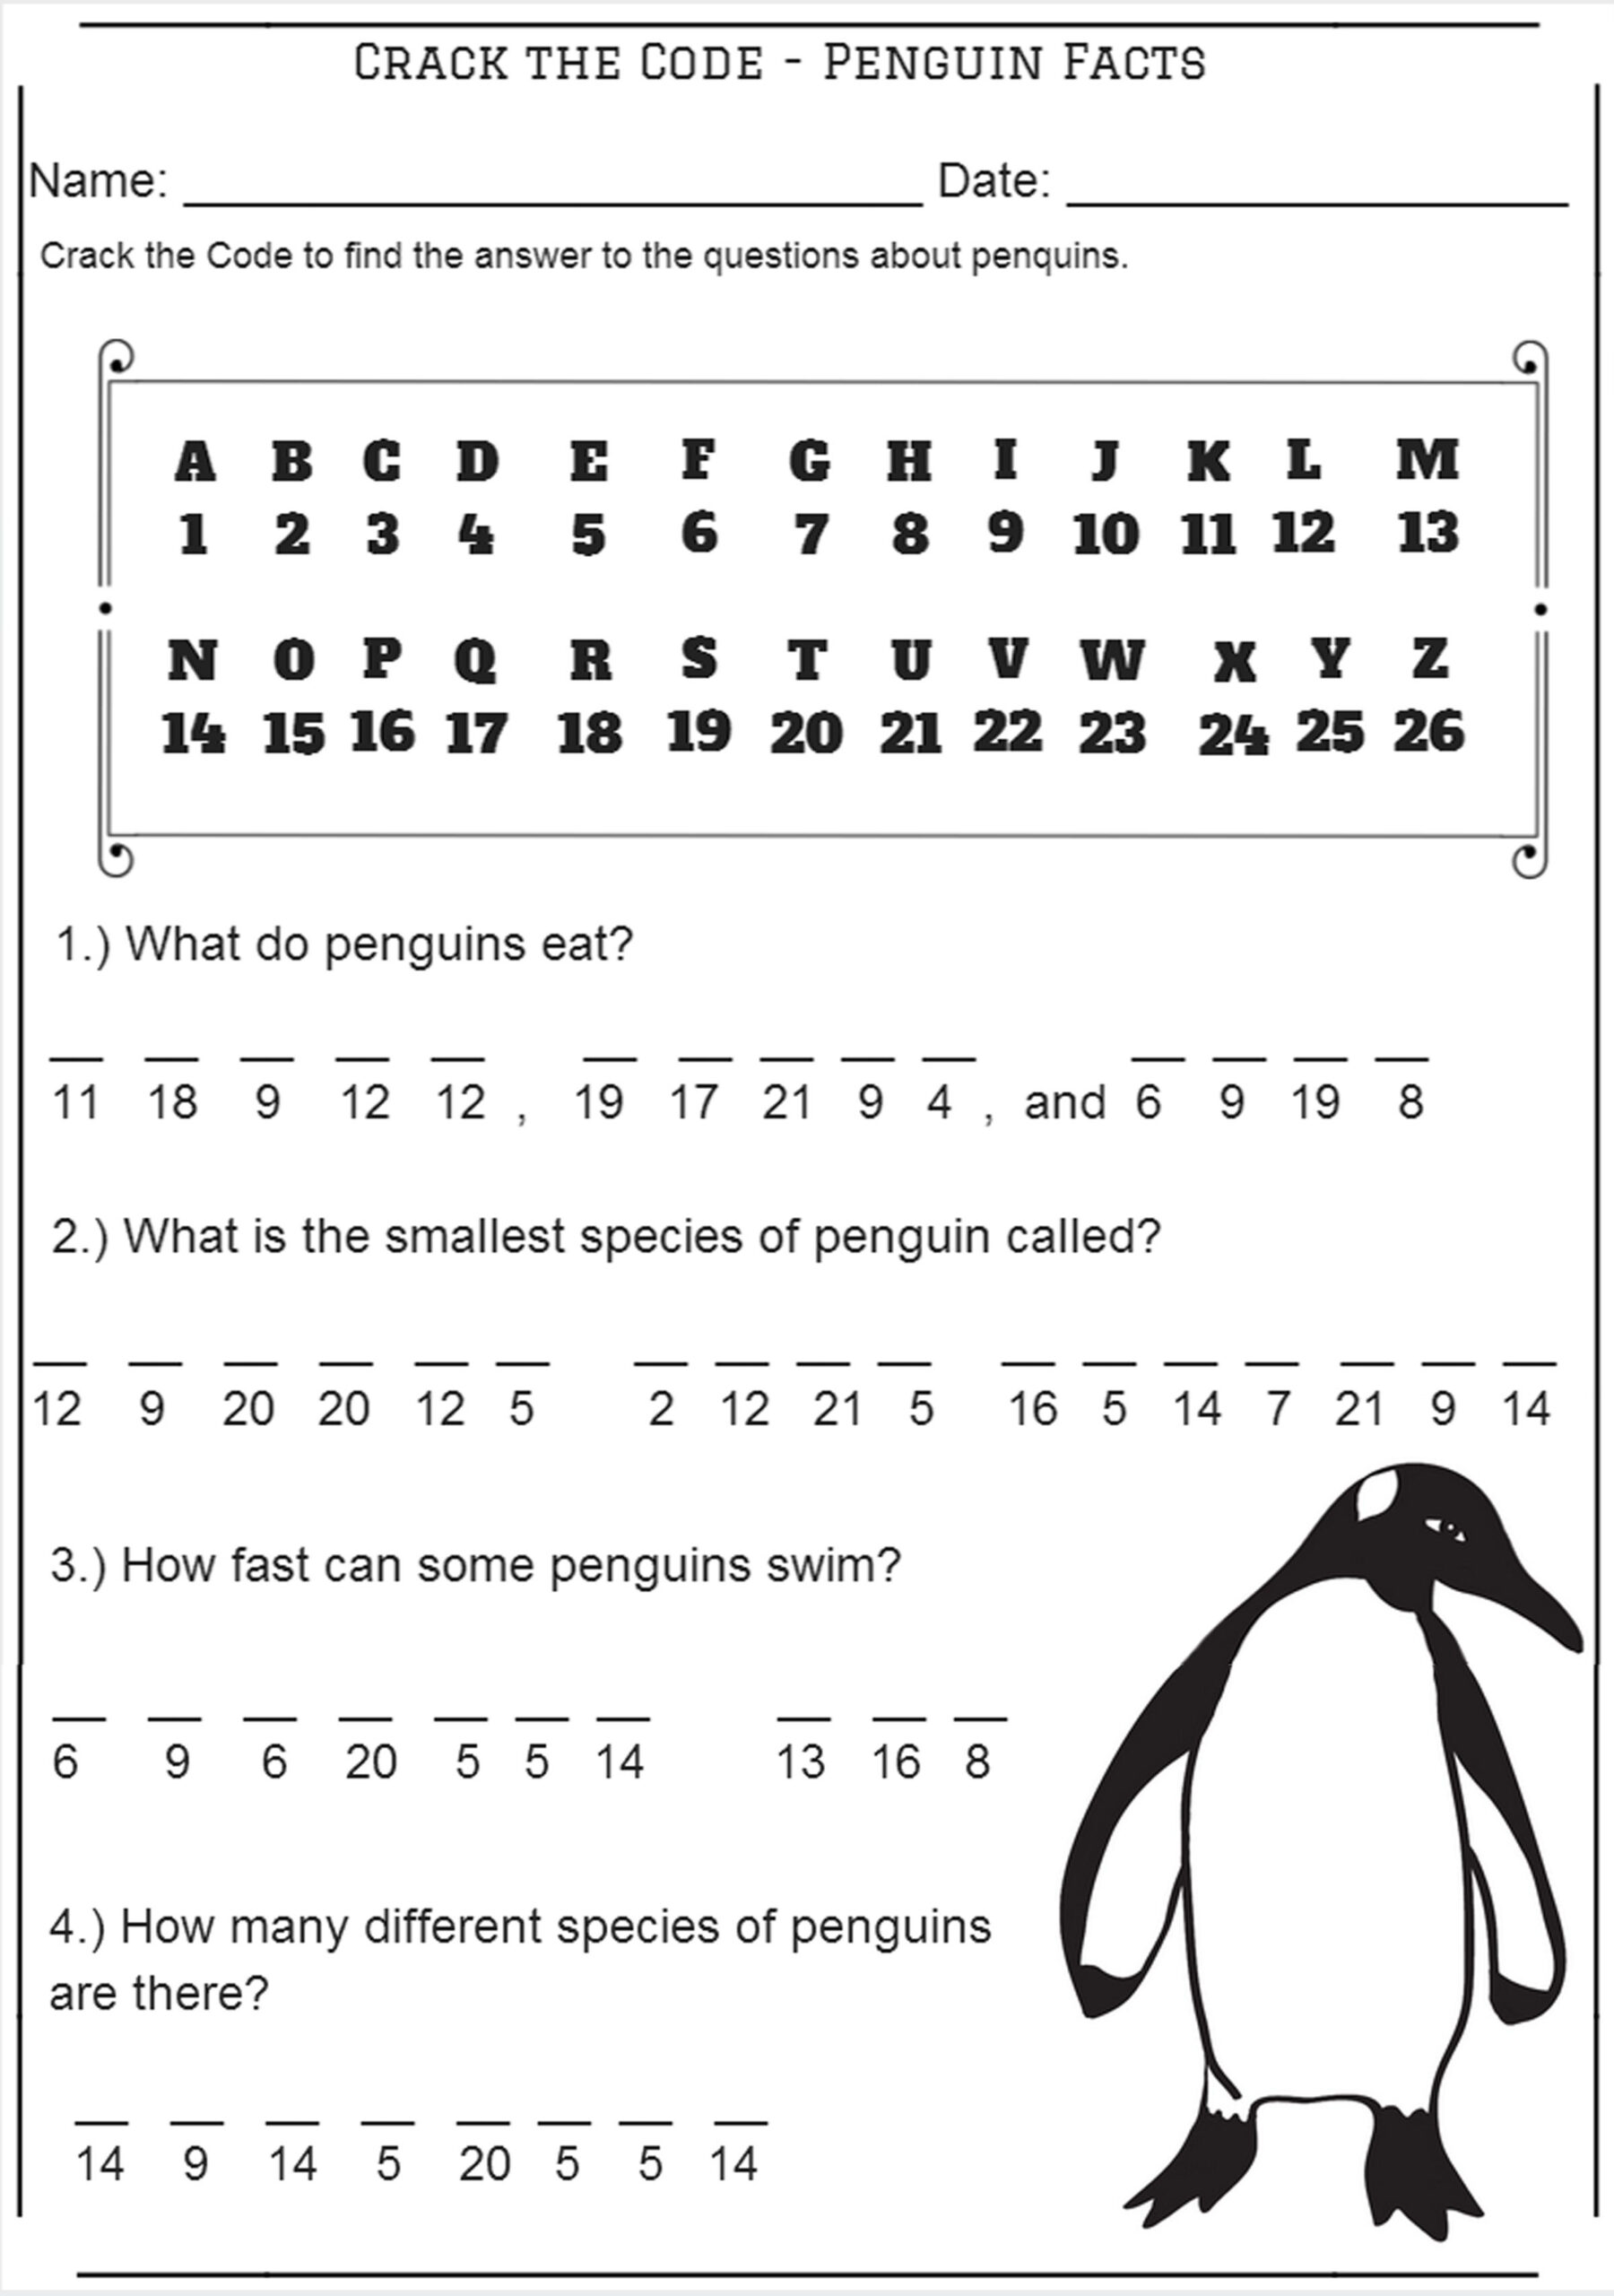 Pin On Free Worksheets For Kids inside Crack The Code Worksheets Printable Free